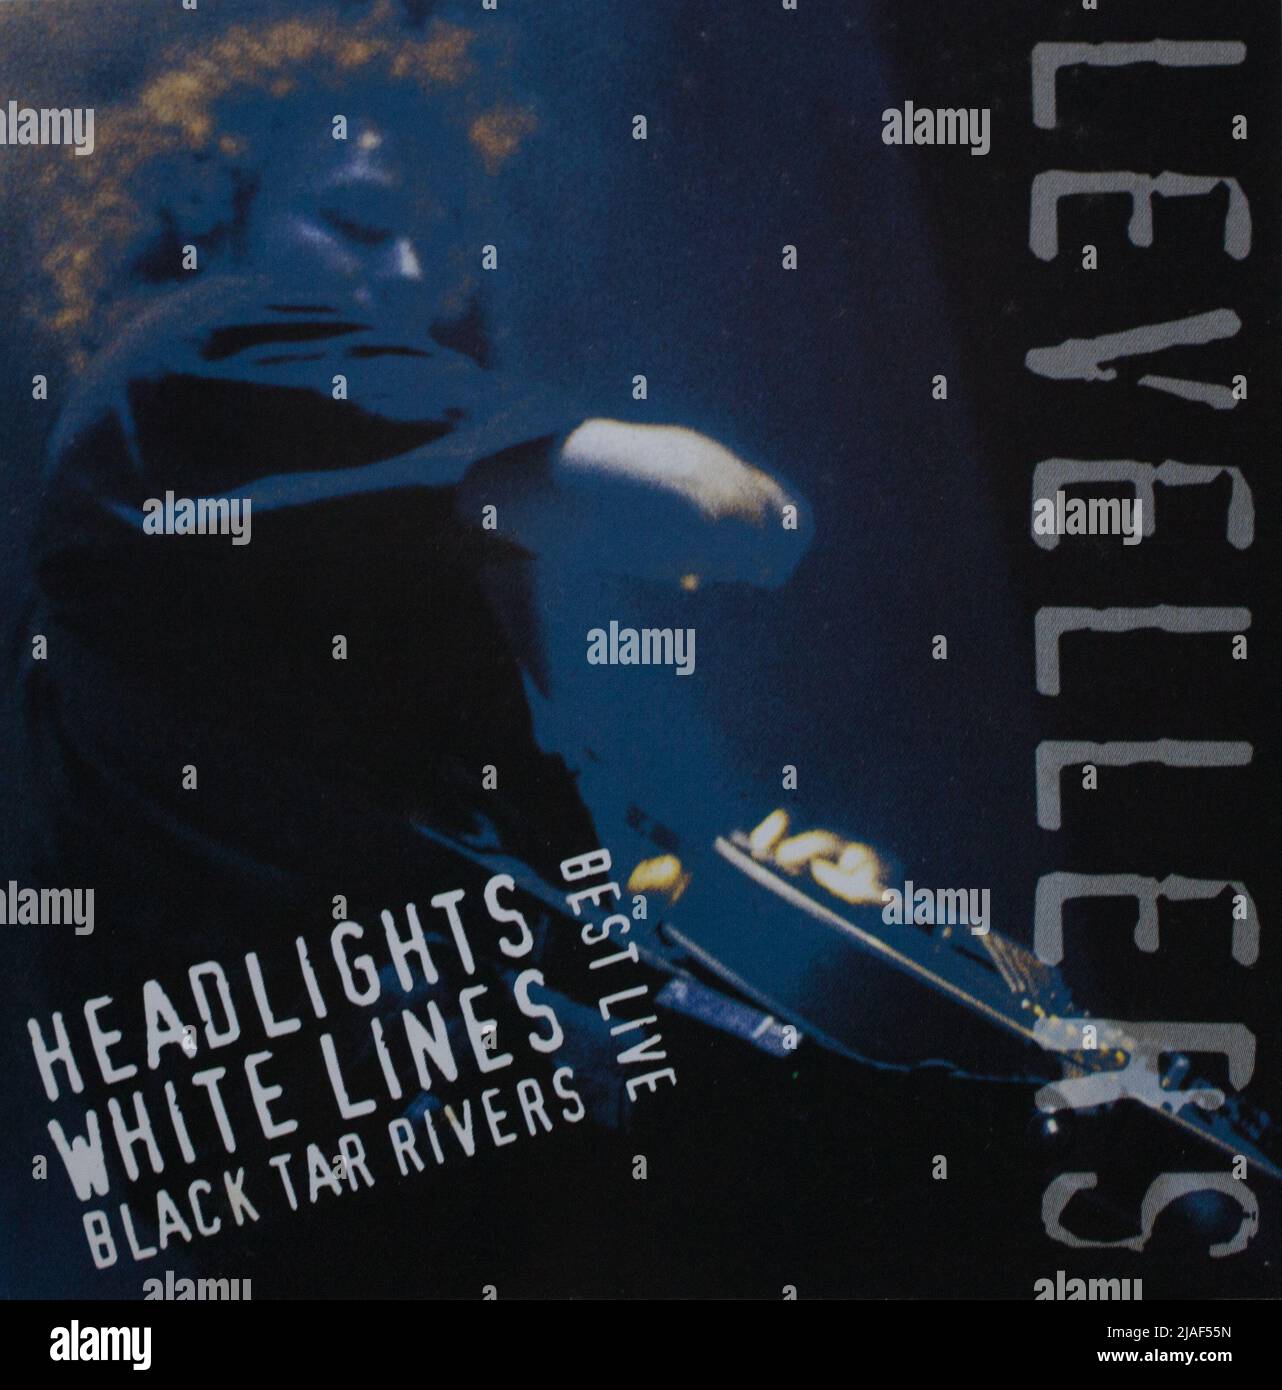 The cd album cover to, The Levellers : Headlights, White Lines, Black Tar Rivers: Best Live Stock Photo